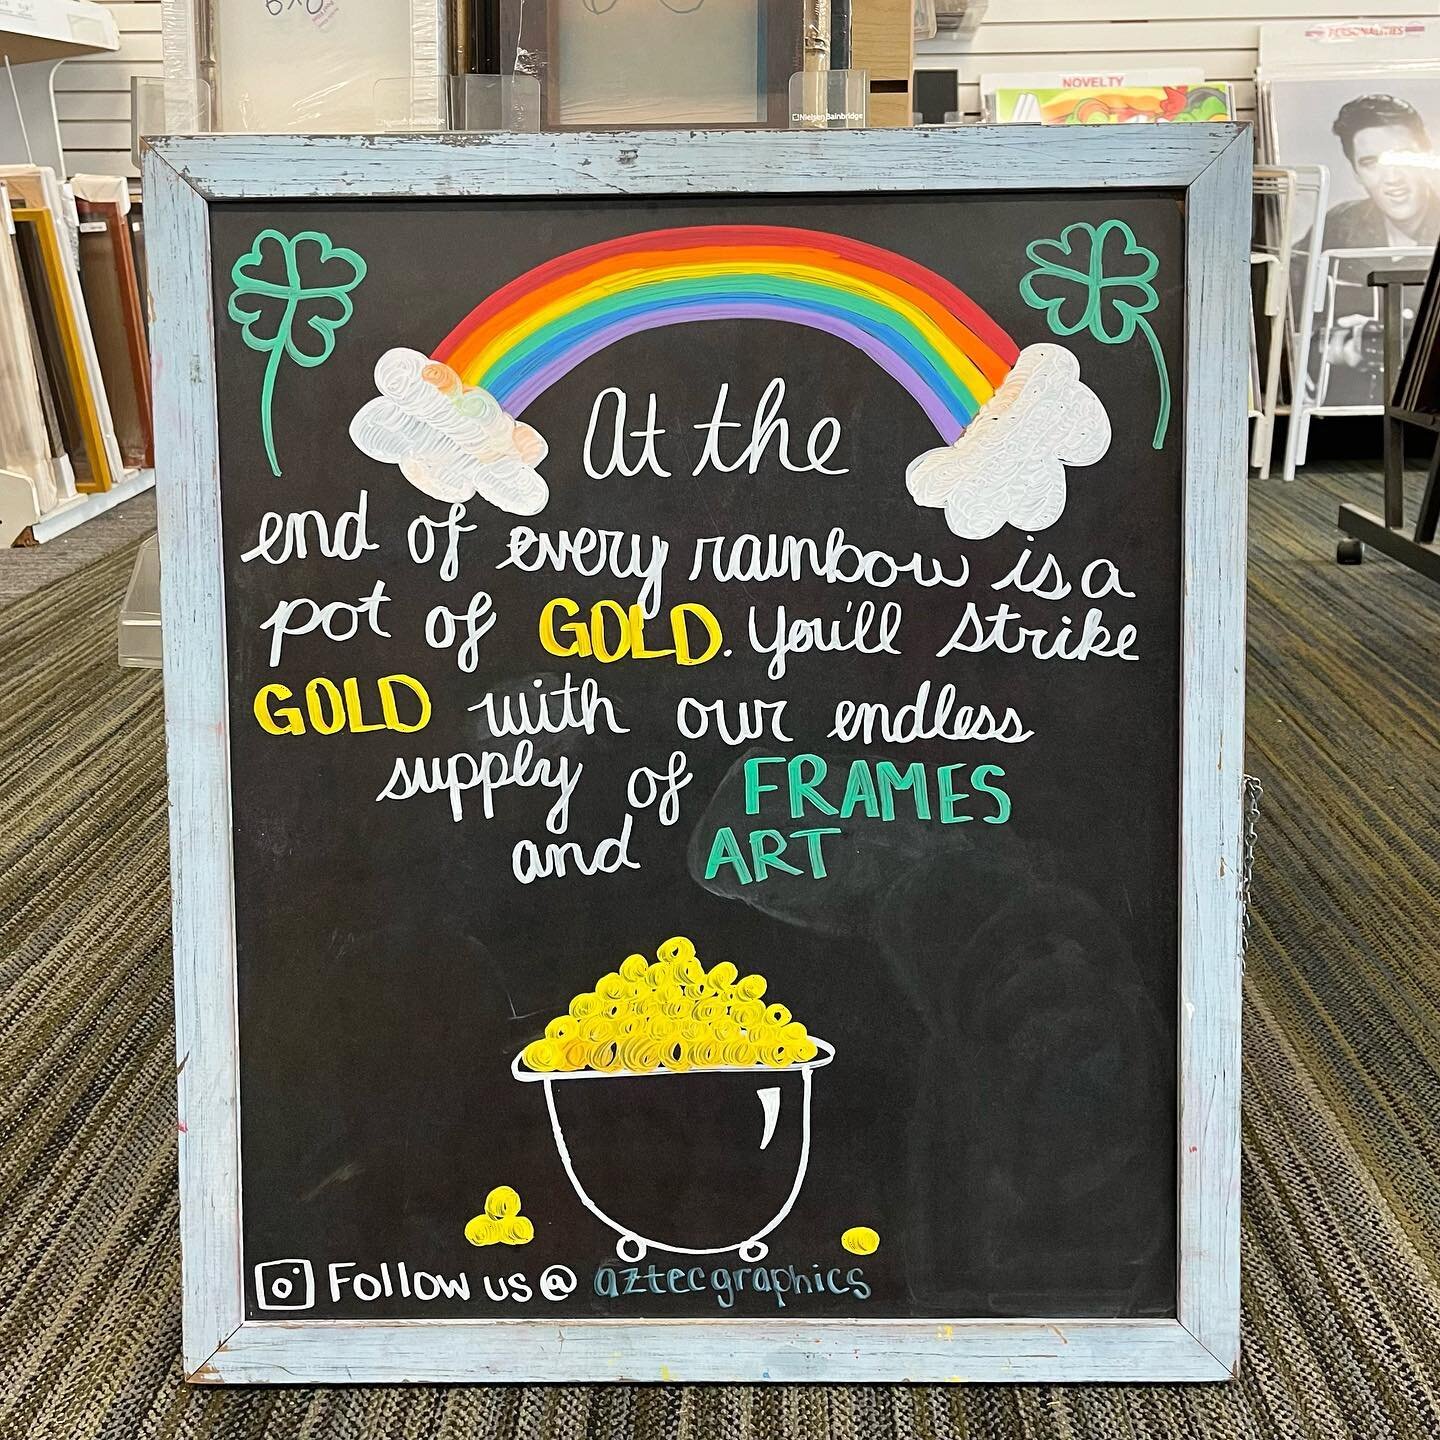 Come find your gold! We are in much anticipation of St. Patrick&rsquo;s Day this year, so much so we got the chalk board art to prove it! 🍀 
&bull;&bull;
&bull;&bull;&bull;
&bull;&bull;
#aztecgraphics #pacificbeach #pacificbeachbusiness #posters #pr